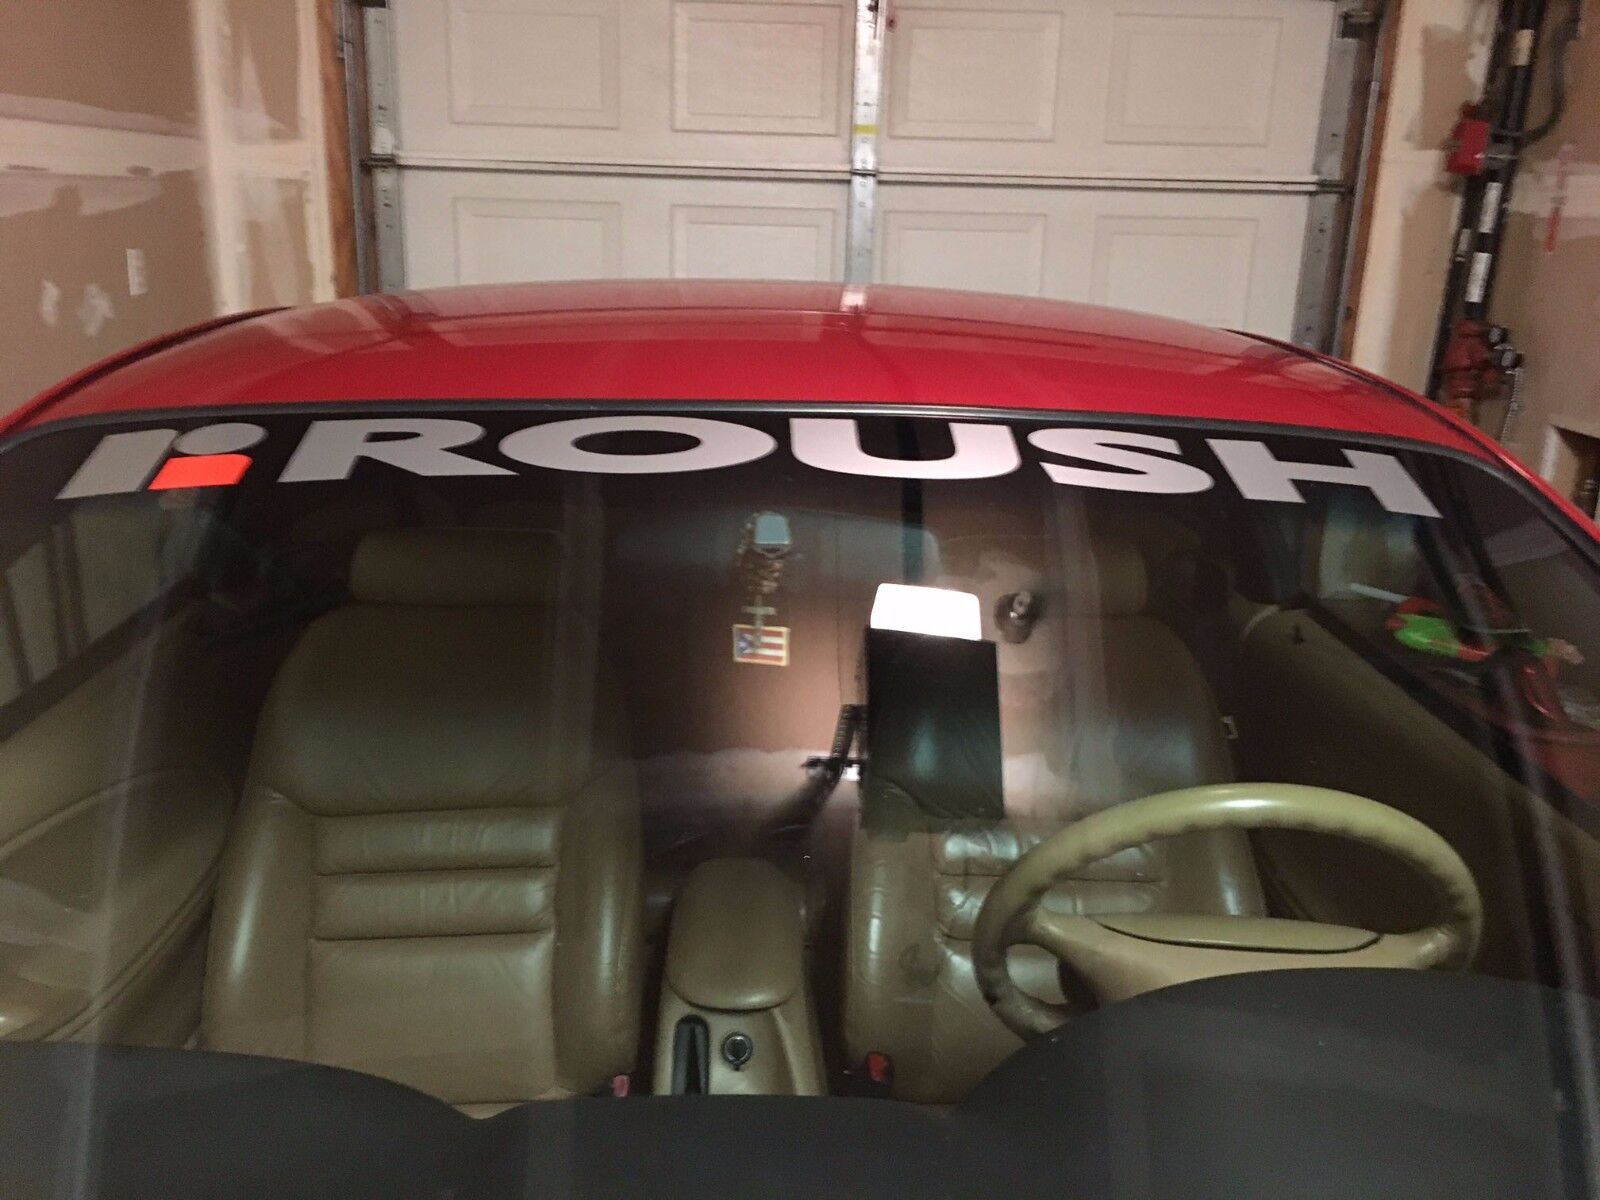 94-04 Mustang ROUSH window banner Solid w/ 2 color 